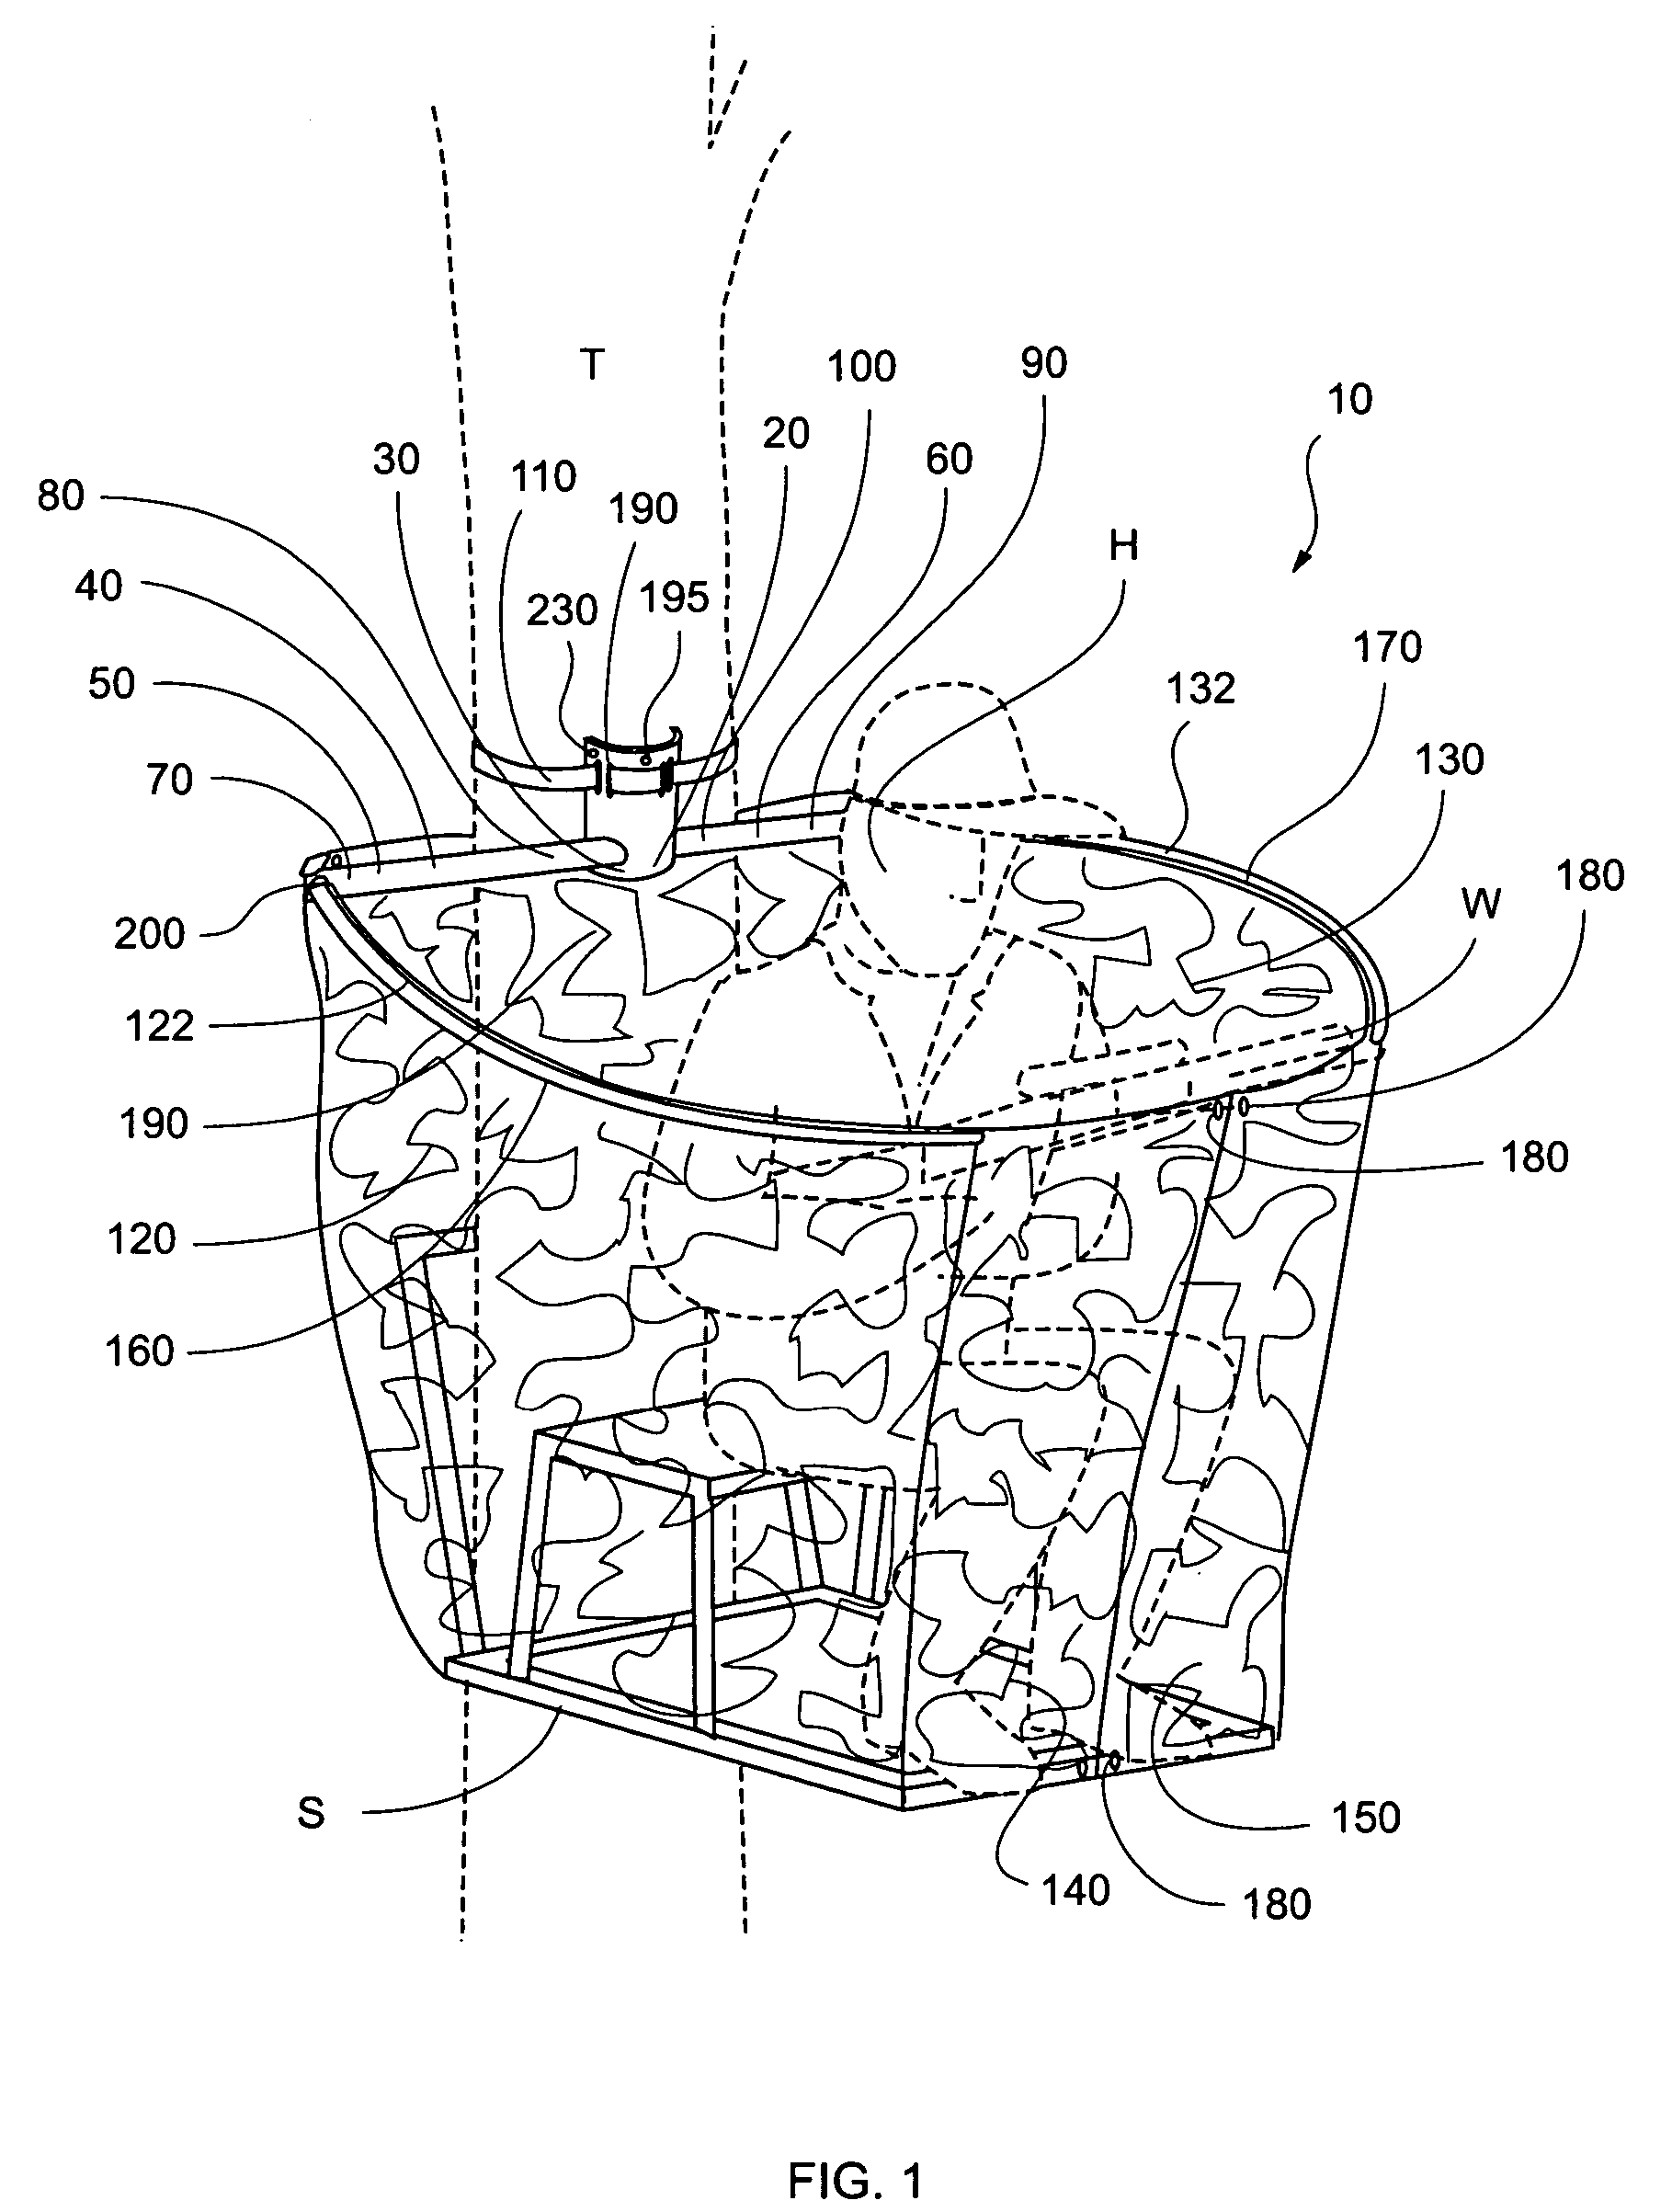 Hunting blind and method of use thereof